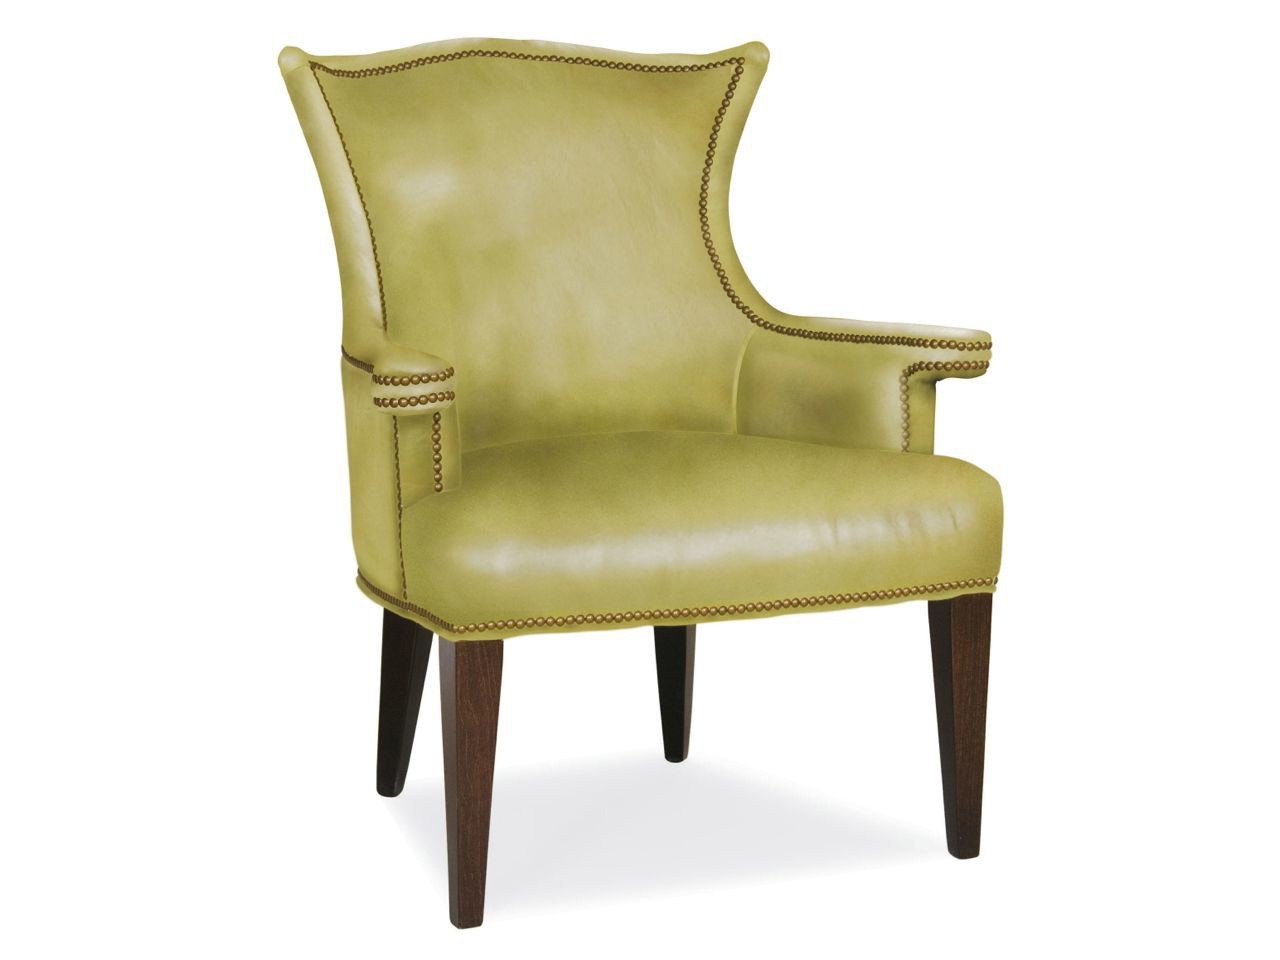 Zoey leather dining arm chair country willow